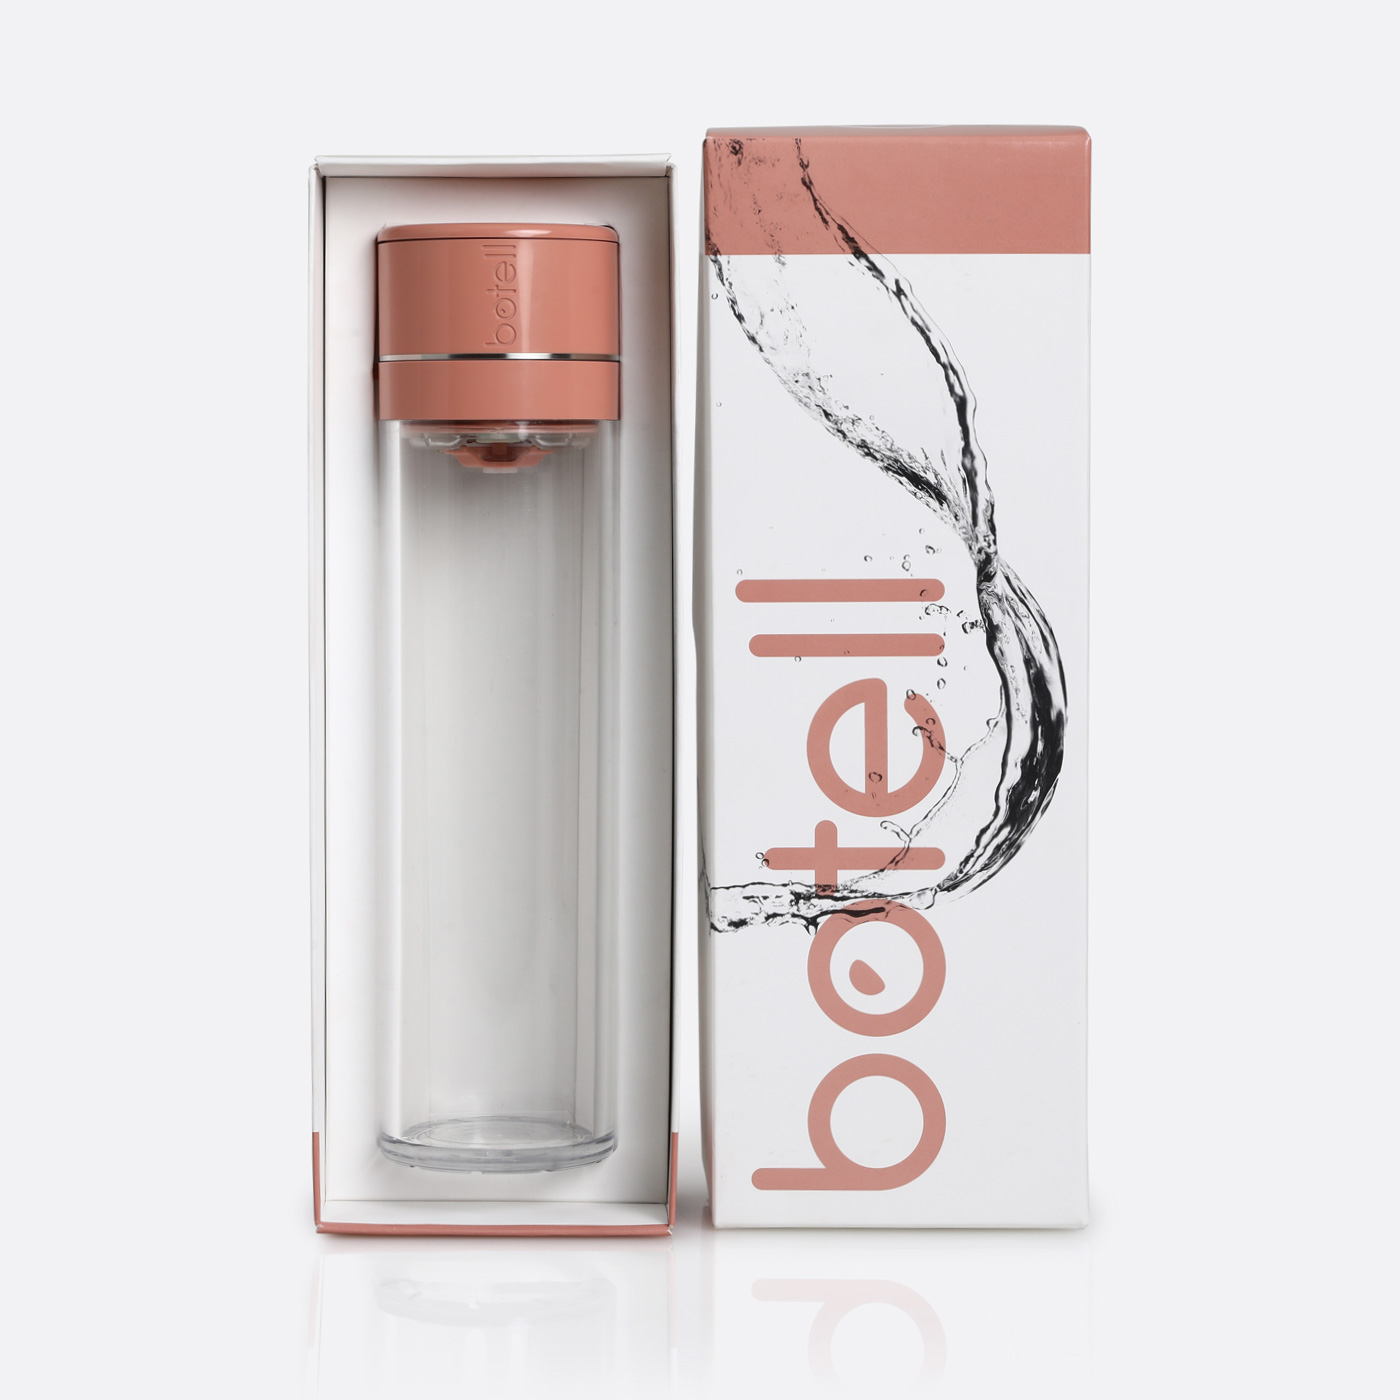 Botell packaging